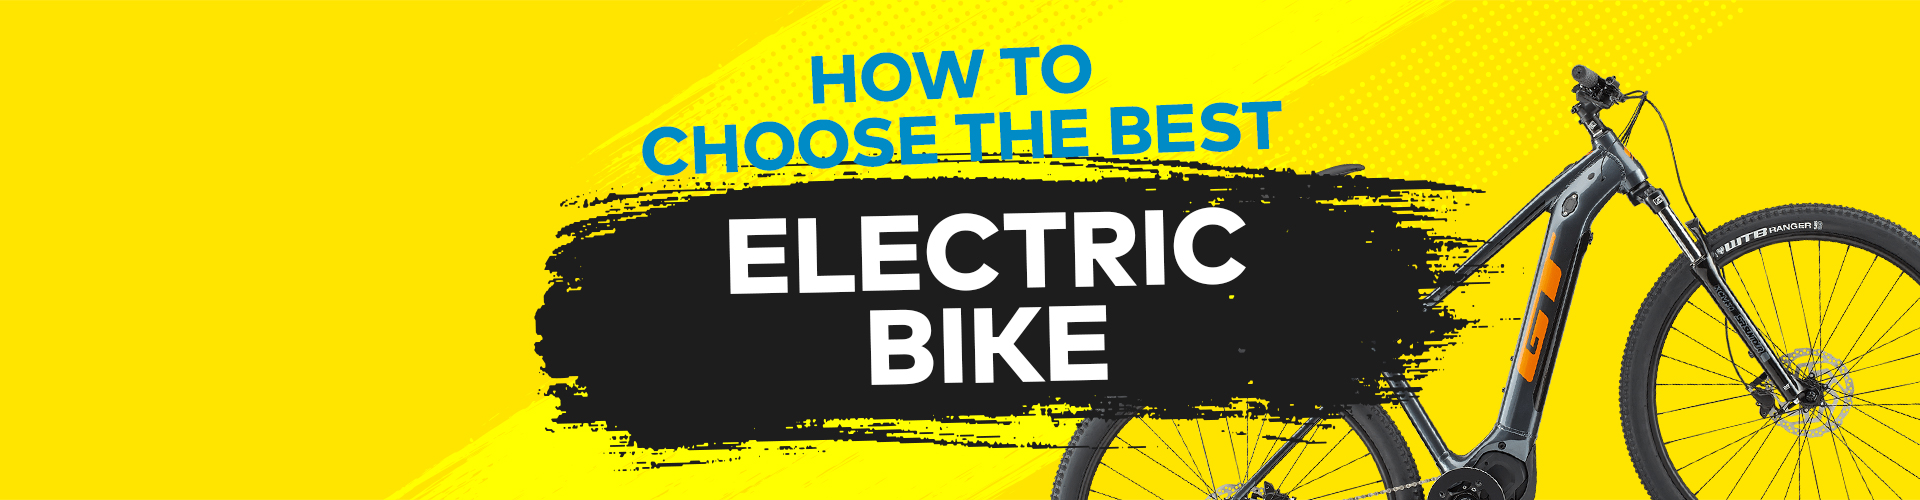 How to choose the best electric bike